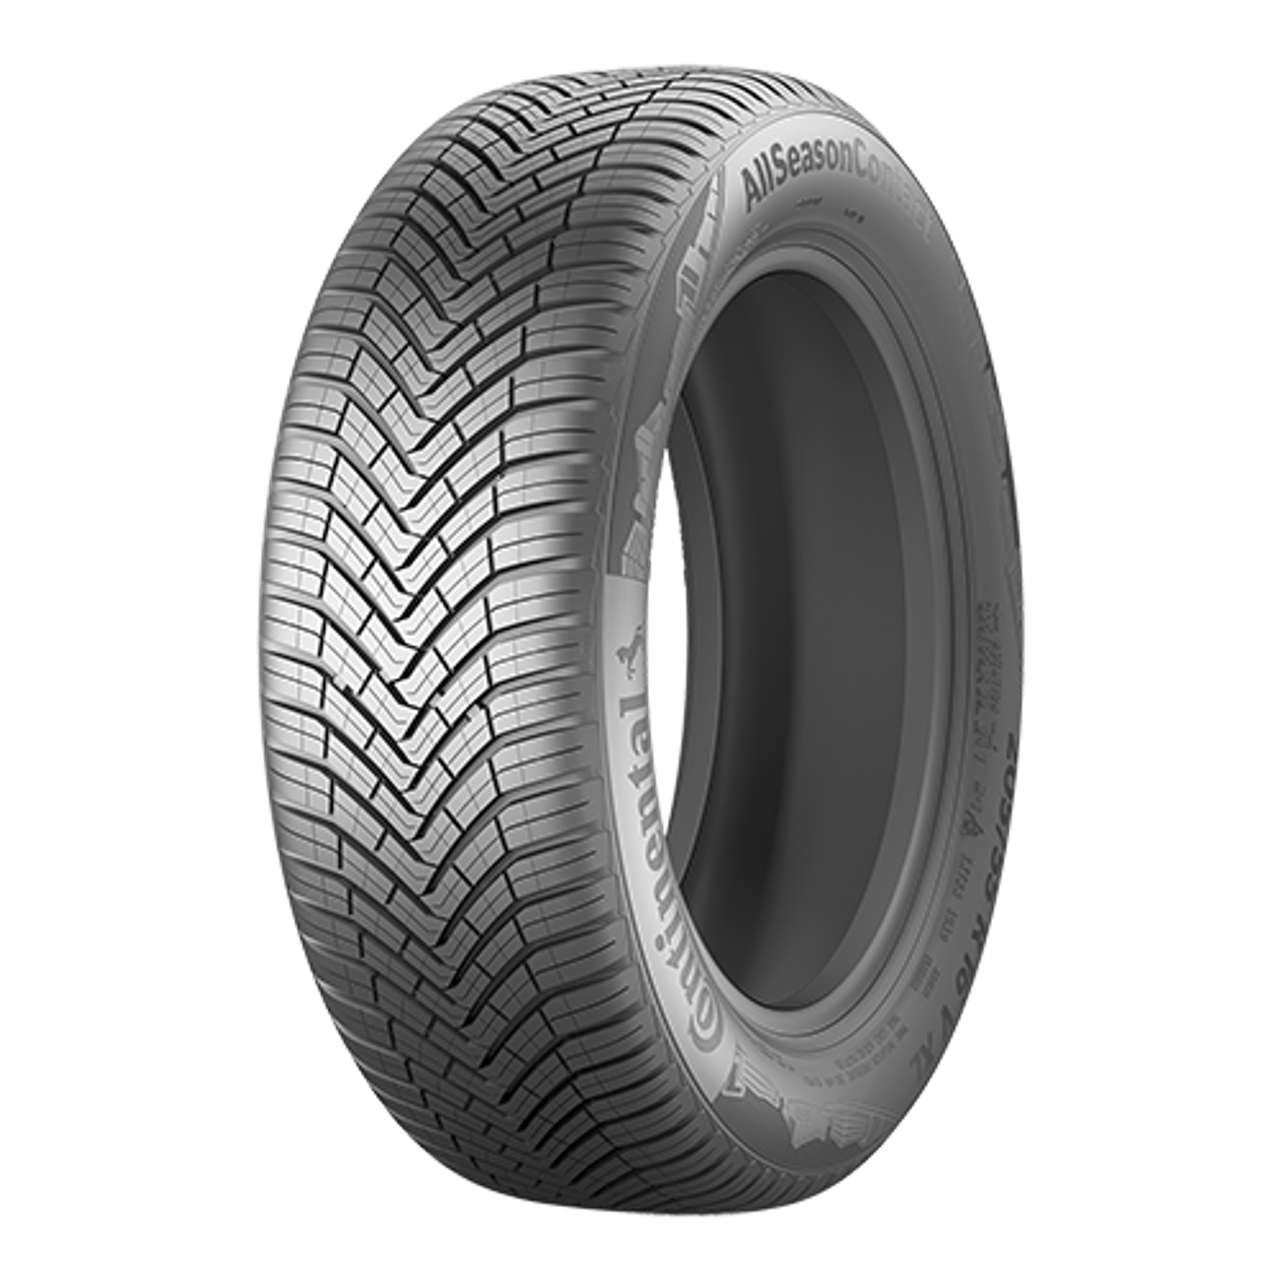 CONTINENTAL ALLSEASONCONTACT (EVc) 215/70R16 100H BSW